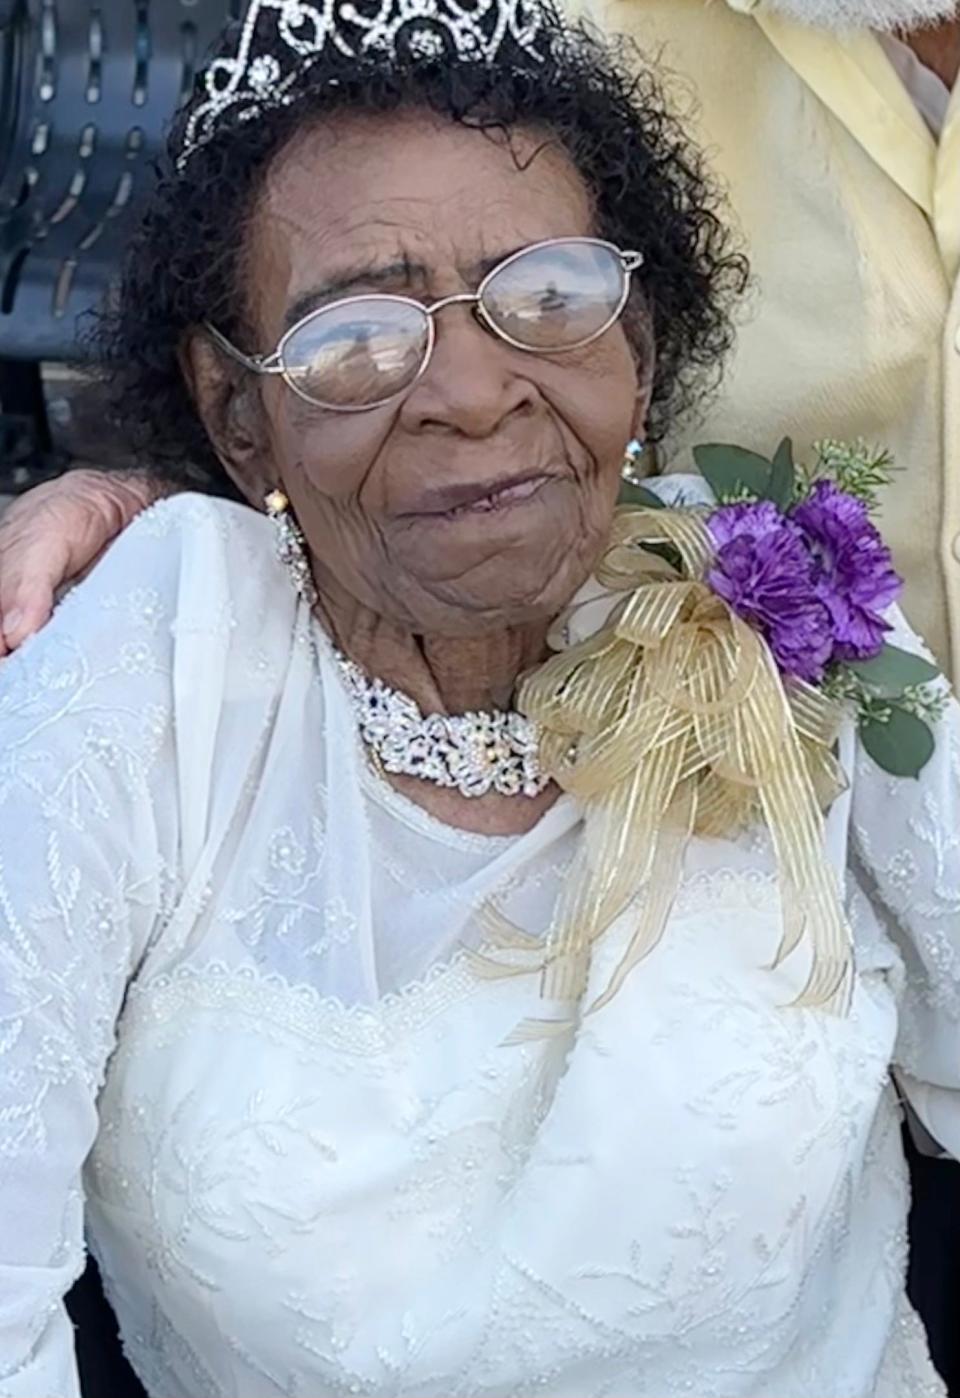 Mattie Underwood Whitehead, who turned 101 on Sept. 26, celebrated the milestone with family and friends at a black-tie event on Sept. 24.